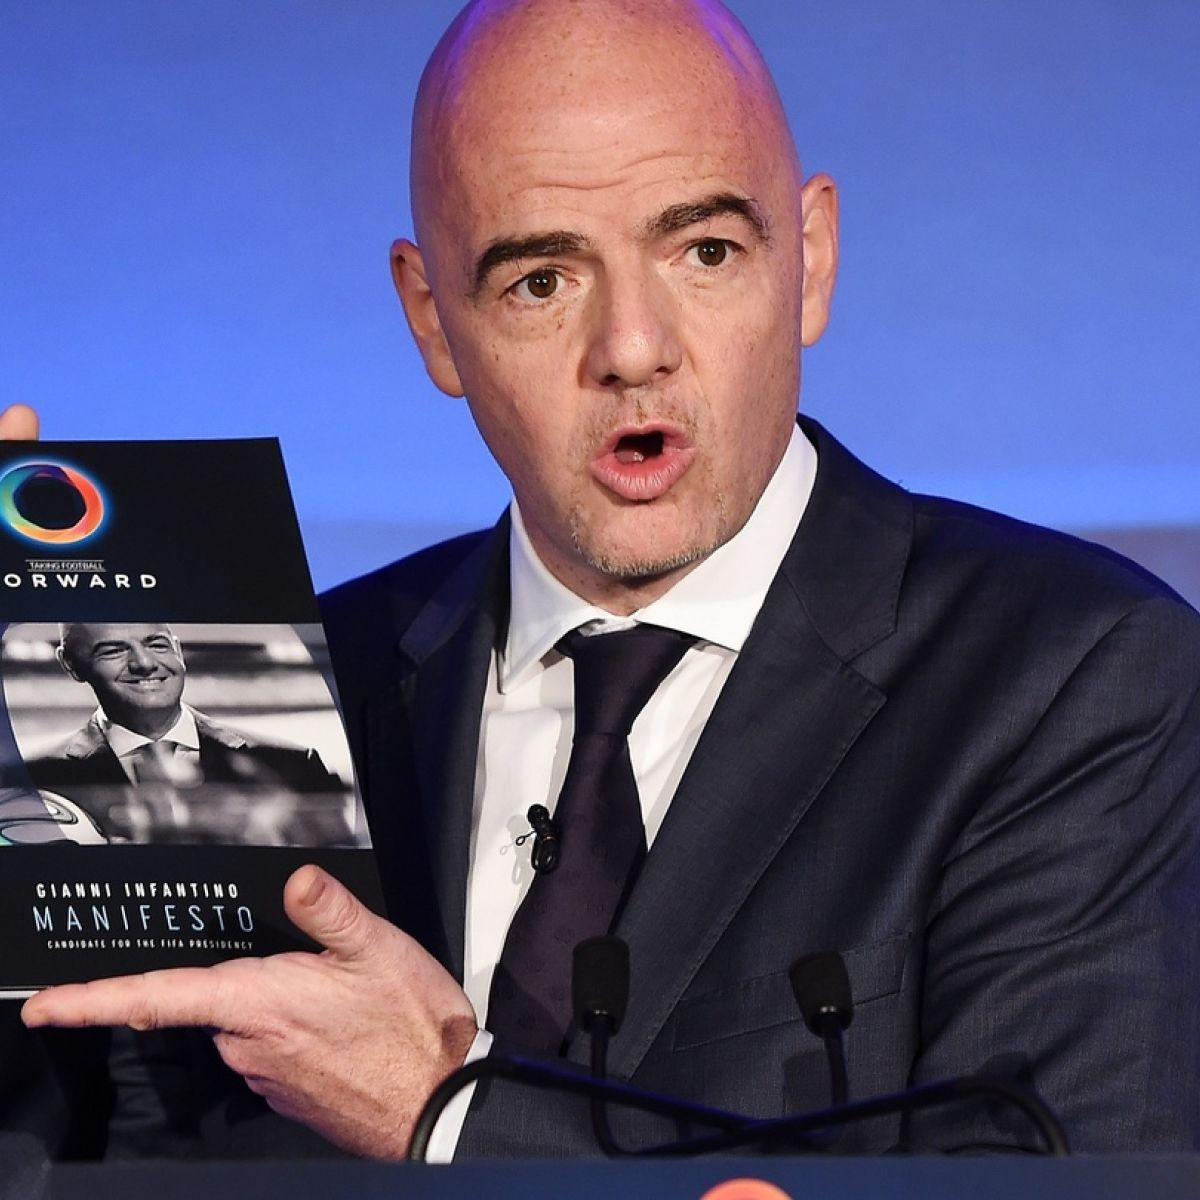 Gianni Infantino promised he would create extra wealth for Member Federations in his manifesto during his successful campaign to become FIFA President ©Getty Images